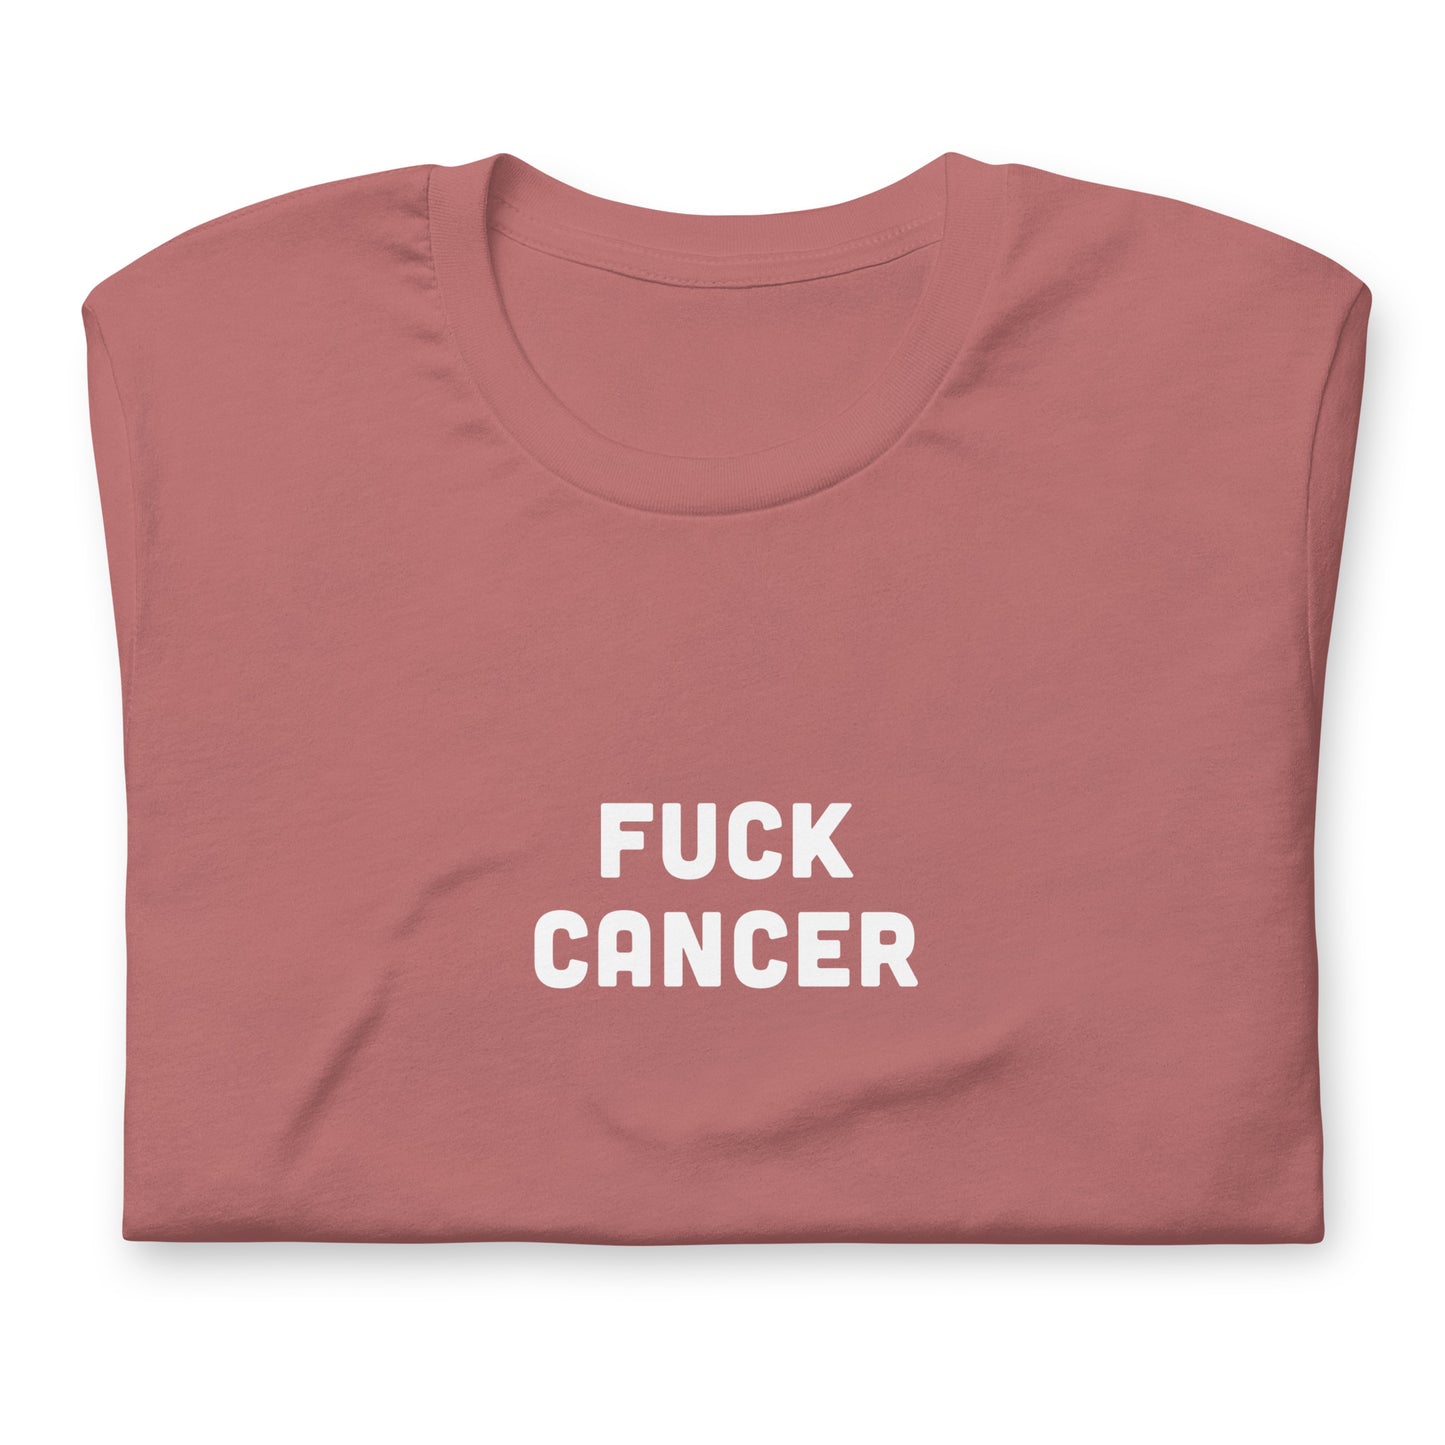 Fuck Cancer T-Shirt Size XL Color Navy